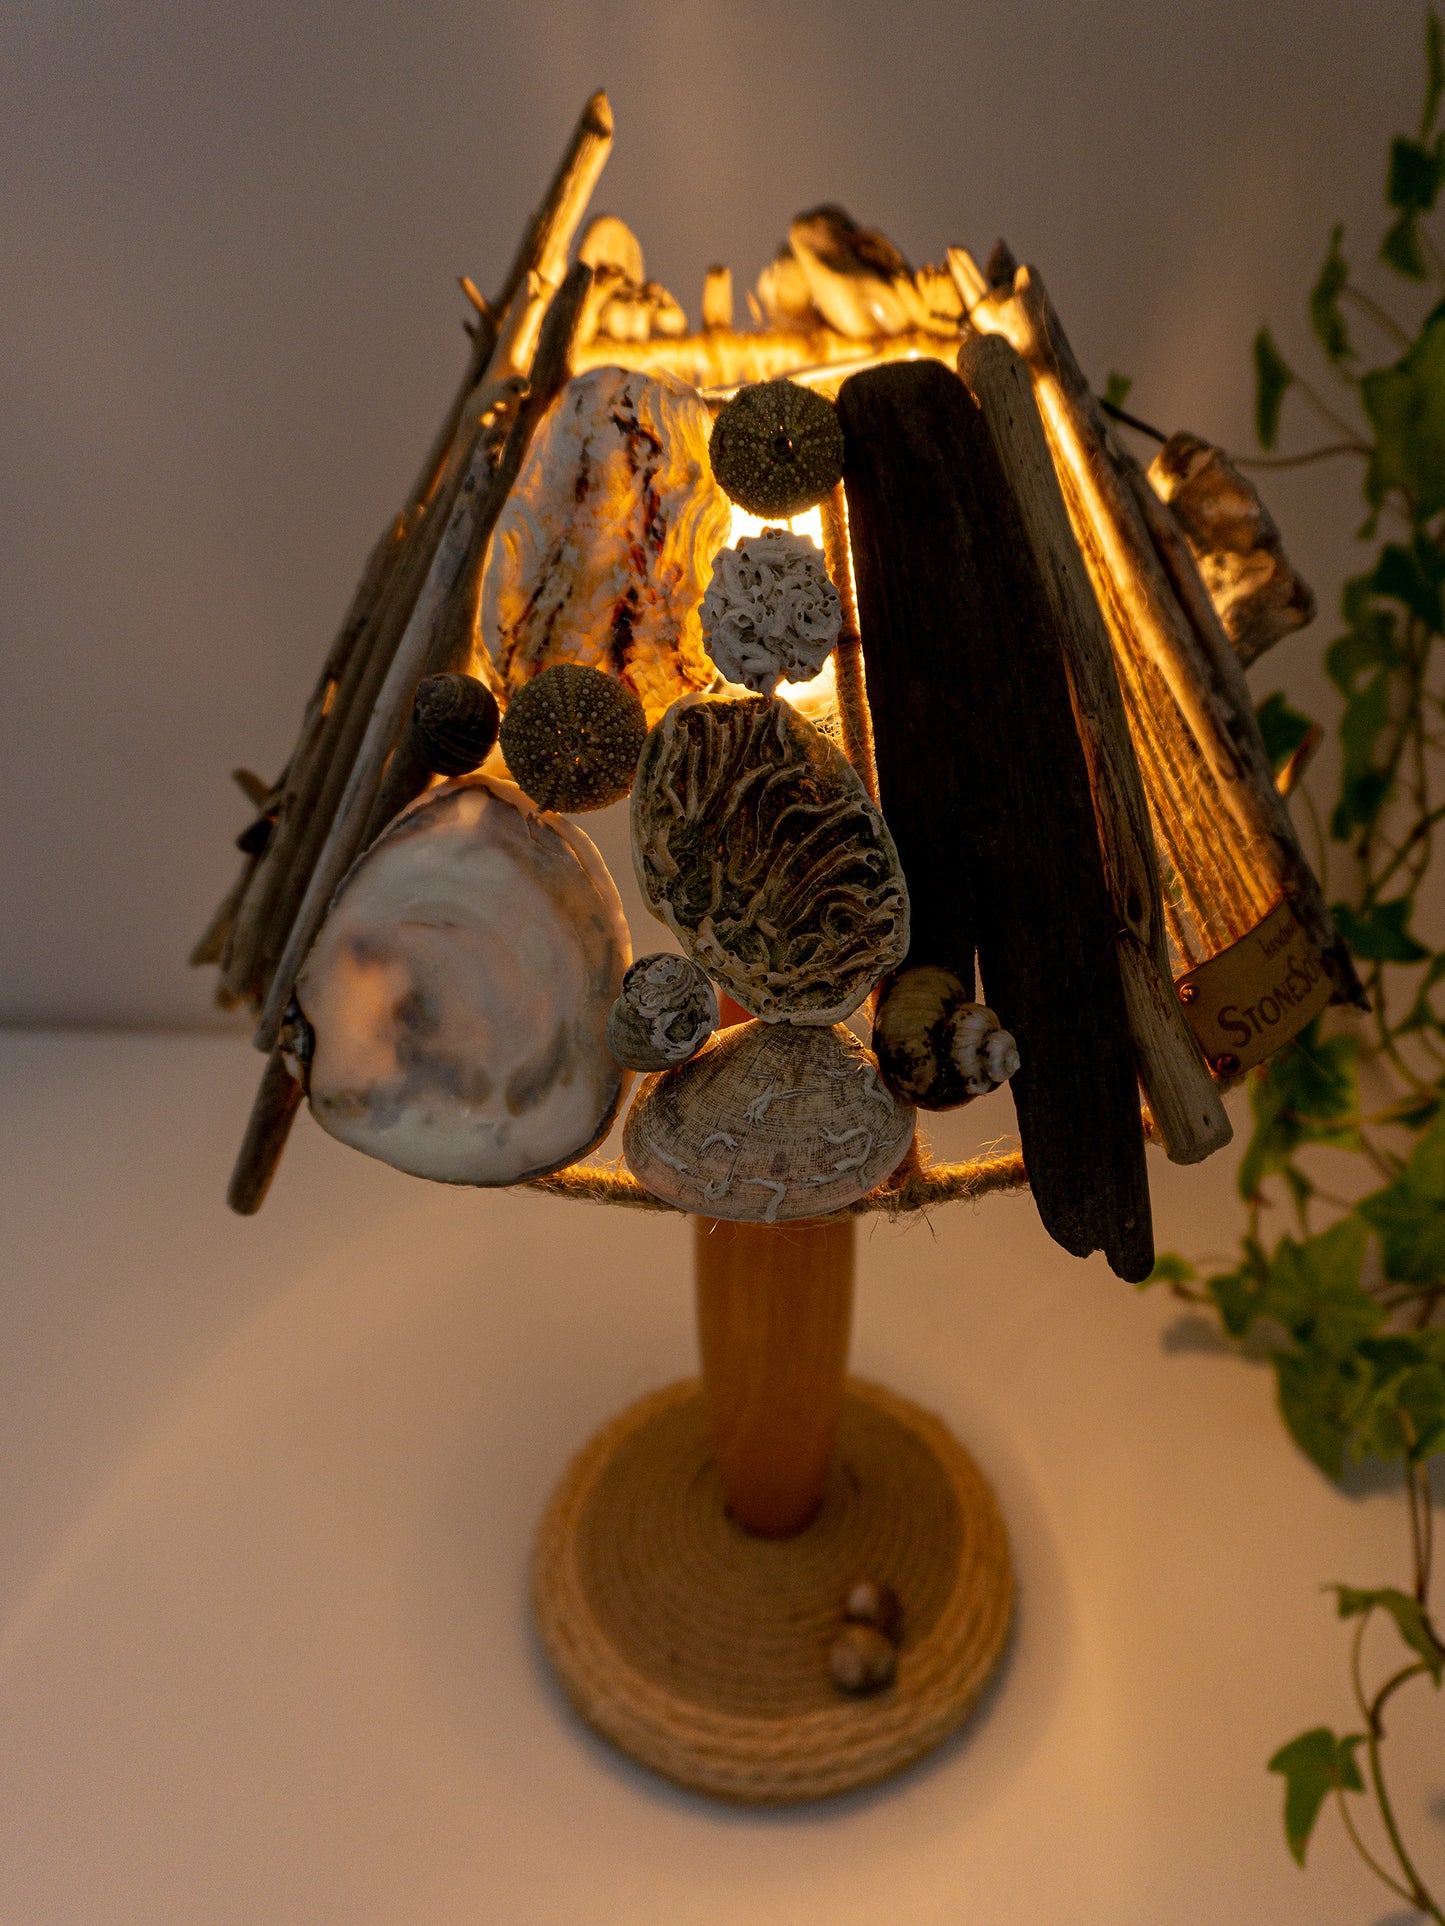 One-of-a-kind DRIFTWOOD TABLE LAMP 'Thore' wooden foot, hand-crafted rustic light